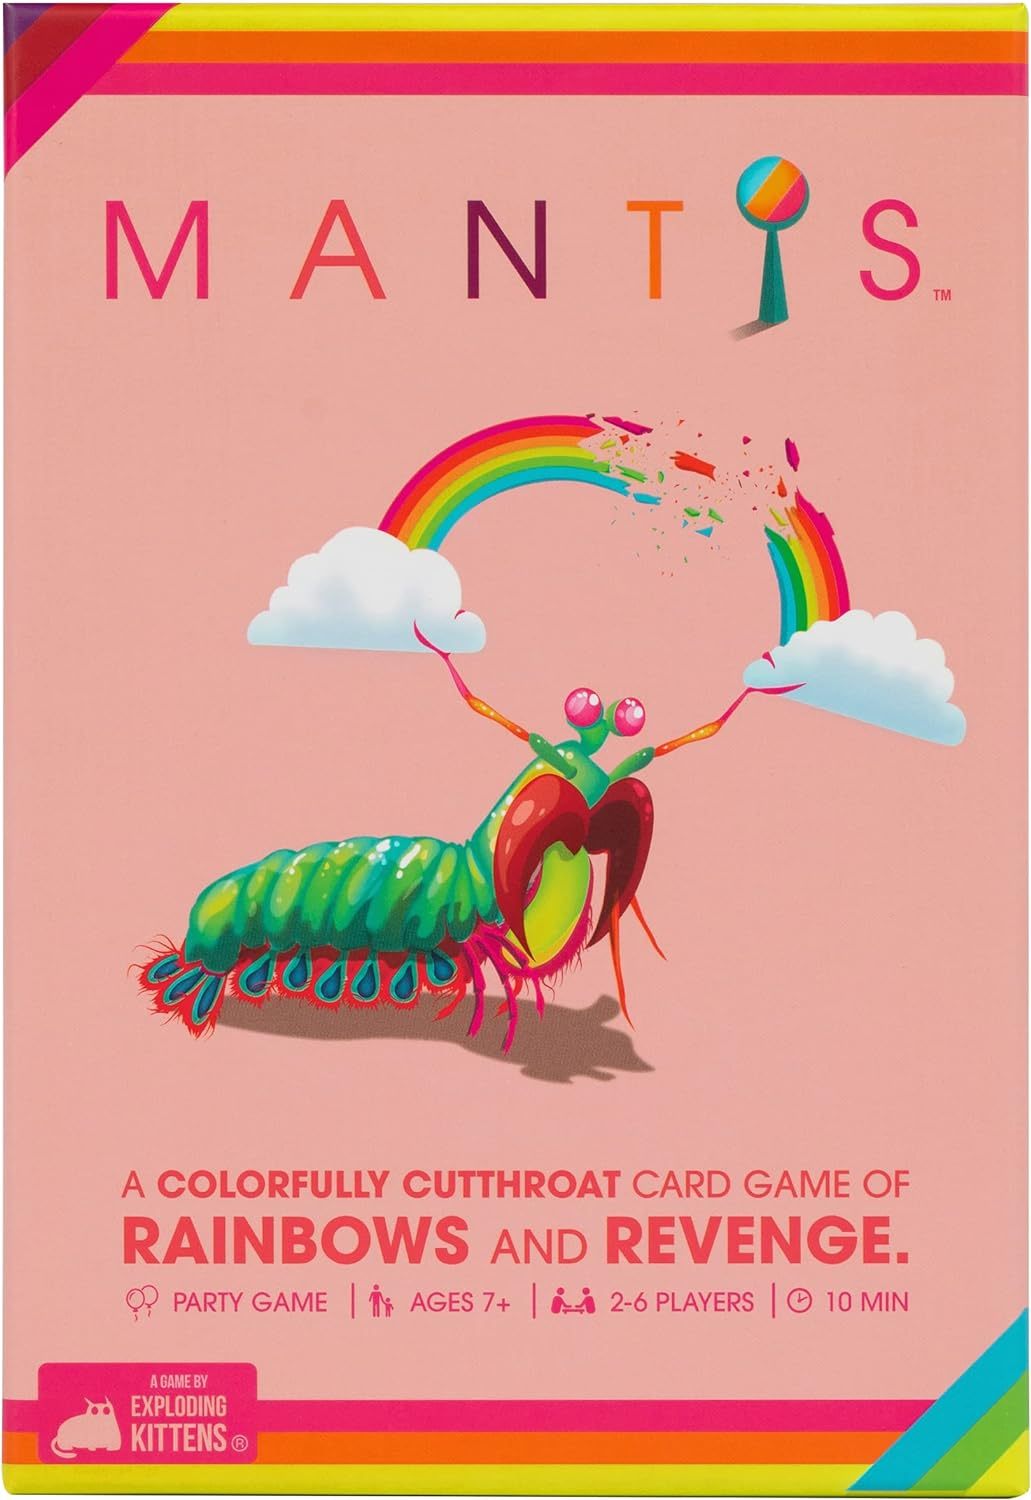 🔥POPULAR 🔥 “A Colorfully Cutthroat Card Game of Rainbows and Revenge…” “The simplicity of UNO and the depth of Gin Rummy…” and it’s a family game for ages 7+ from the makers of Exploding Kittens? Yes, please.
Mantis is easy to learn and play, and...